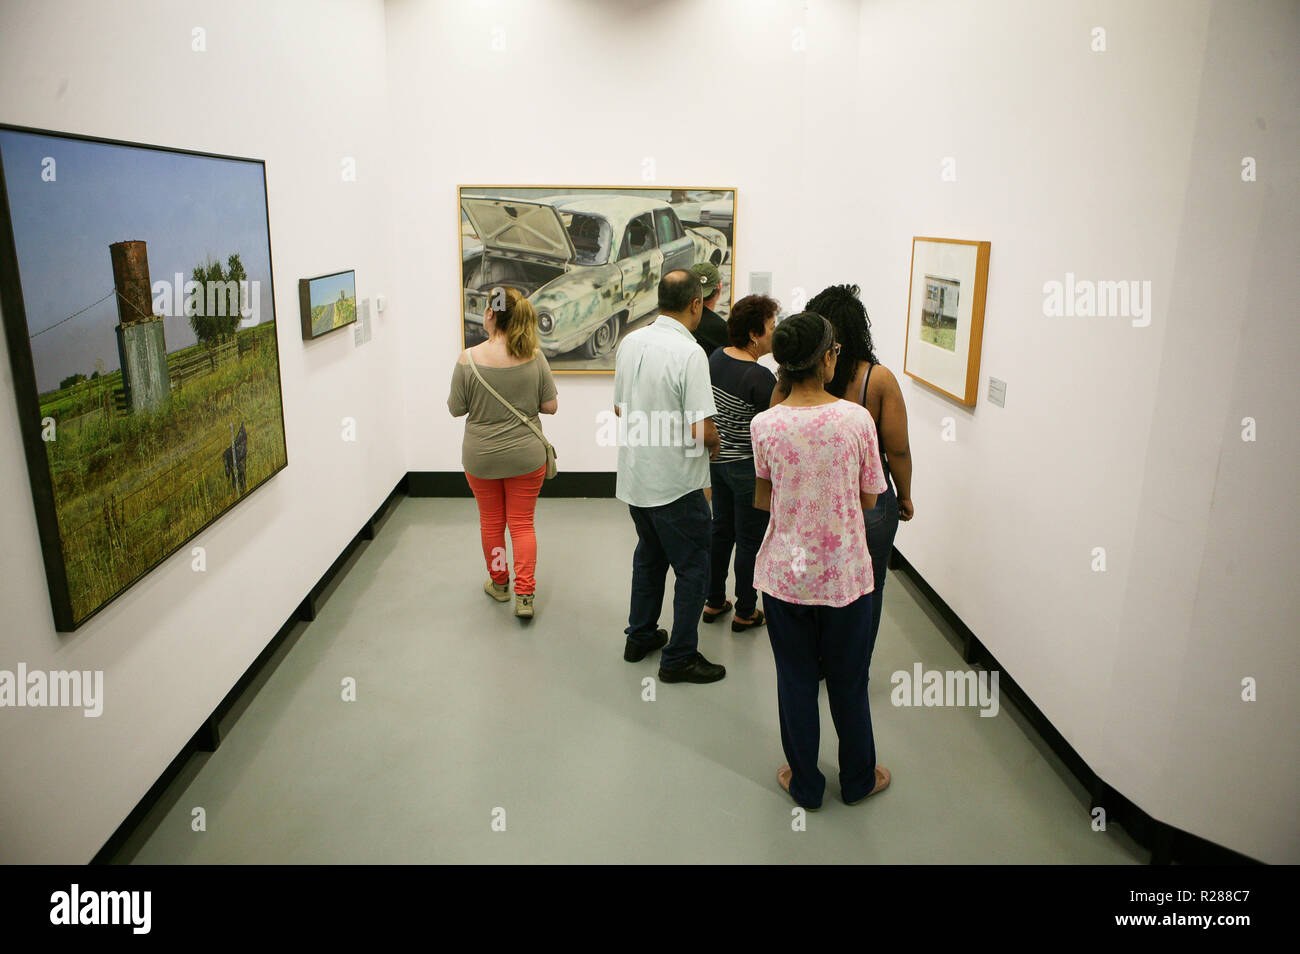 São Paulo, Brazil. 17th November 2018. Movement of visitors at the exhibition 50 Years of Realism From Photorealism to Virtual Reality at the Banco do Brasil Cultural Center SÃ£o Paulo. With nearly 100 works by 30 artists from Brazil and abroad, the exhibition has as its starting point reality and its representation through painting, sculpture and virtual reality in the last 50 years. Credit: Dario Oliveira/ZUMA Wire/Alamy Live News Stock Photo